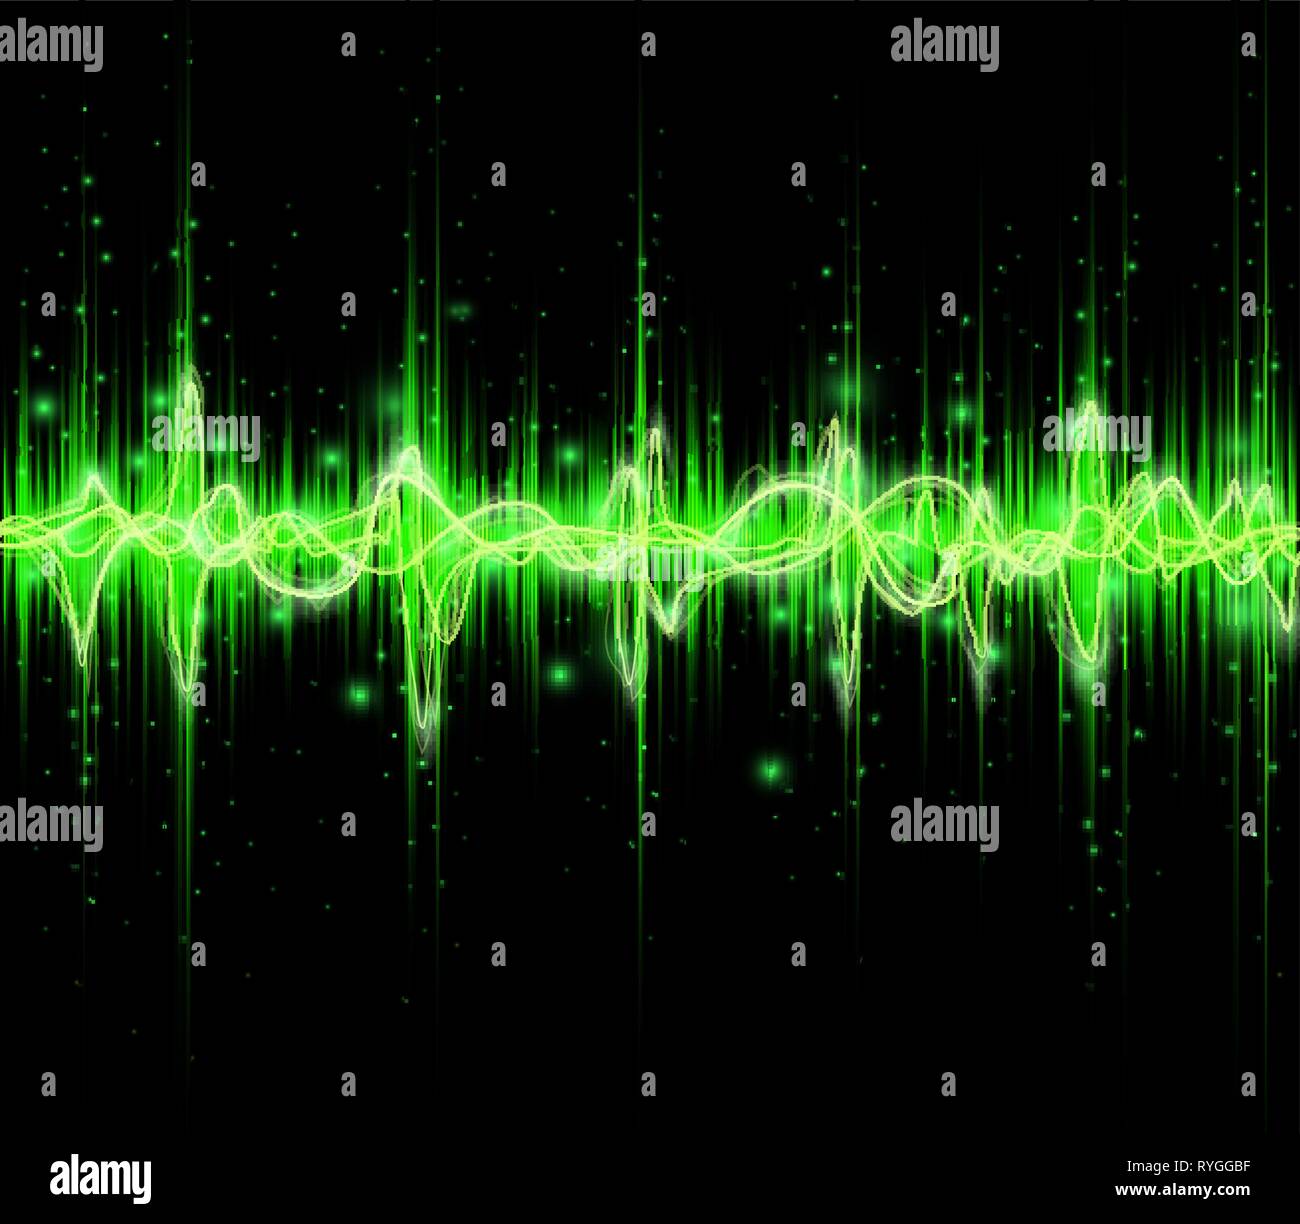 music sound waves Stock Vector